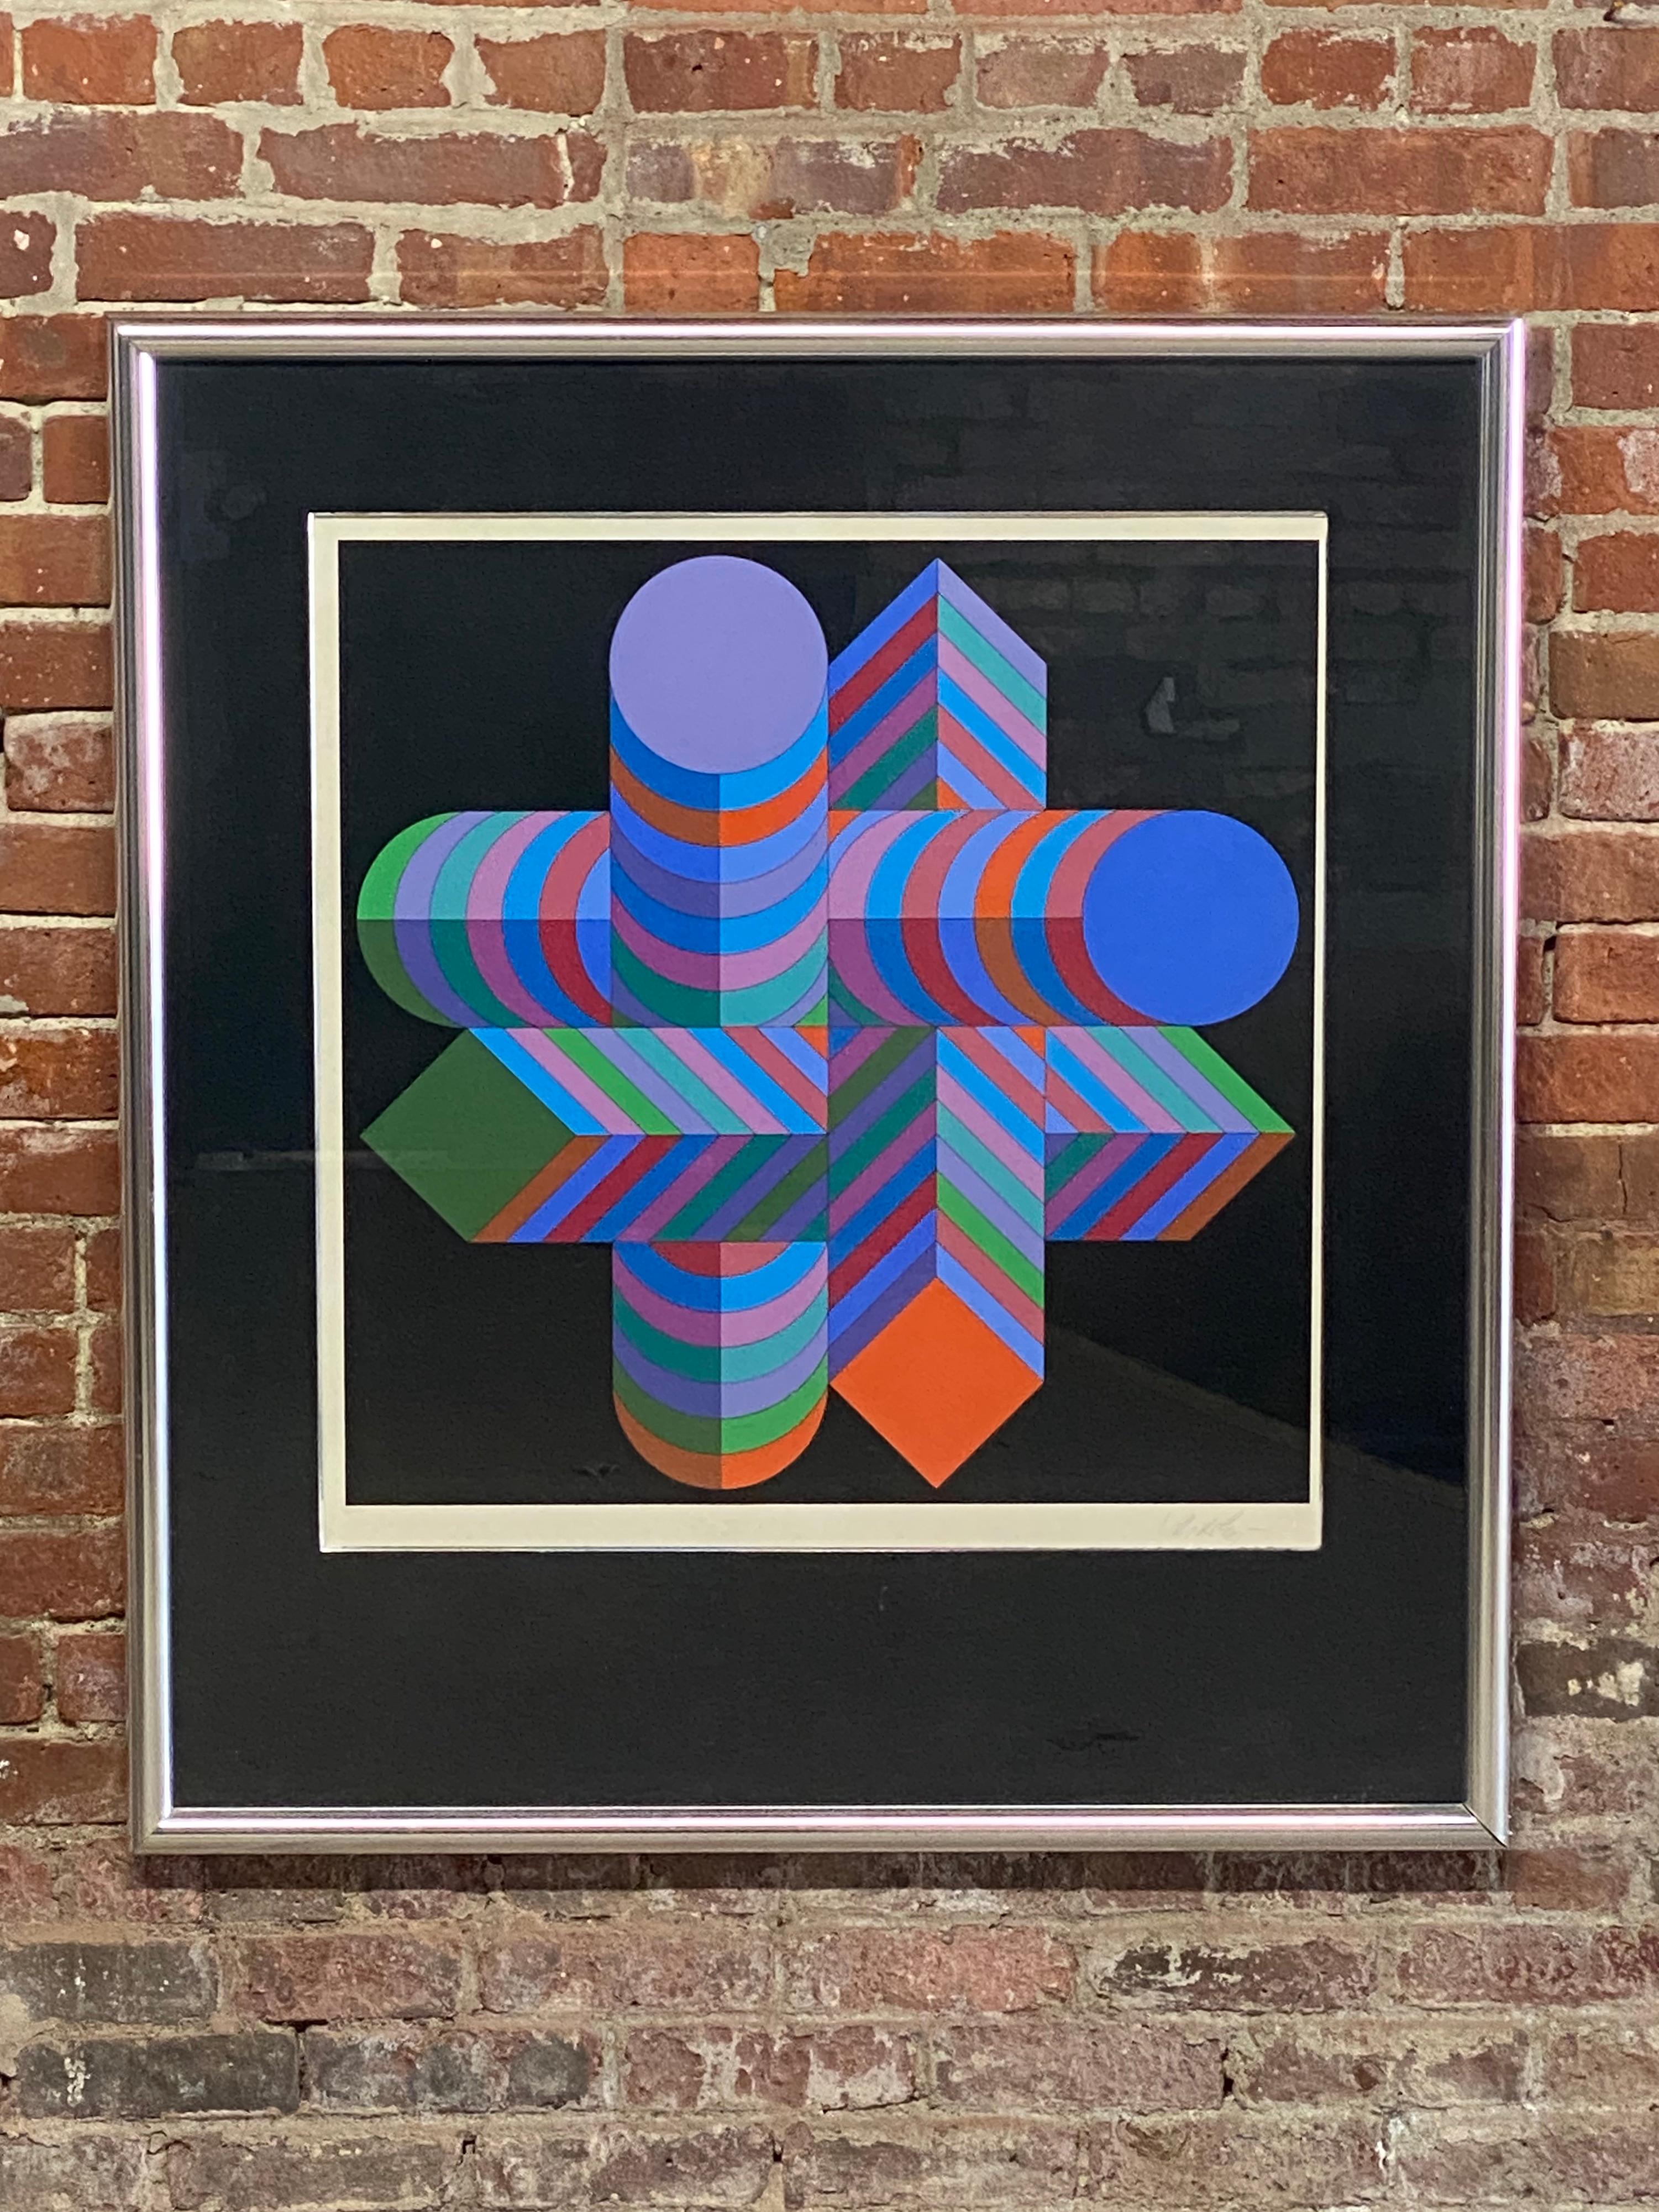 Colorful Vasarely Op-Art lithograph. Signed in pencil lower right, Vasarely and numbered edition 66/250, lower left. Vasarely's works are geometric precision, science, and line. As the viewer moves, the work of art moves with you. Framing treatment